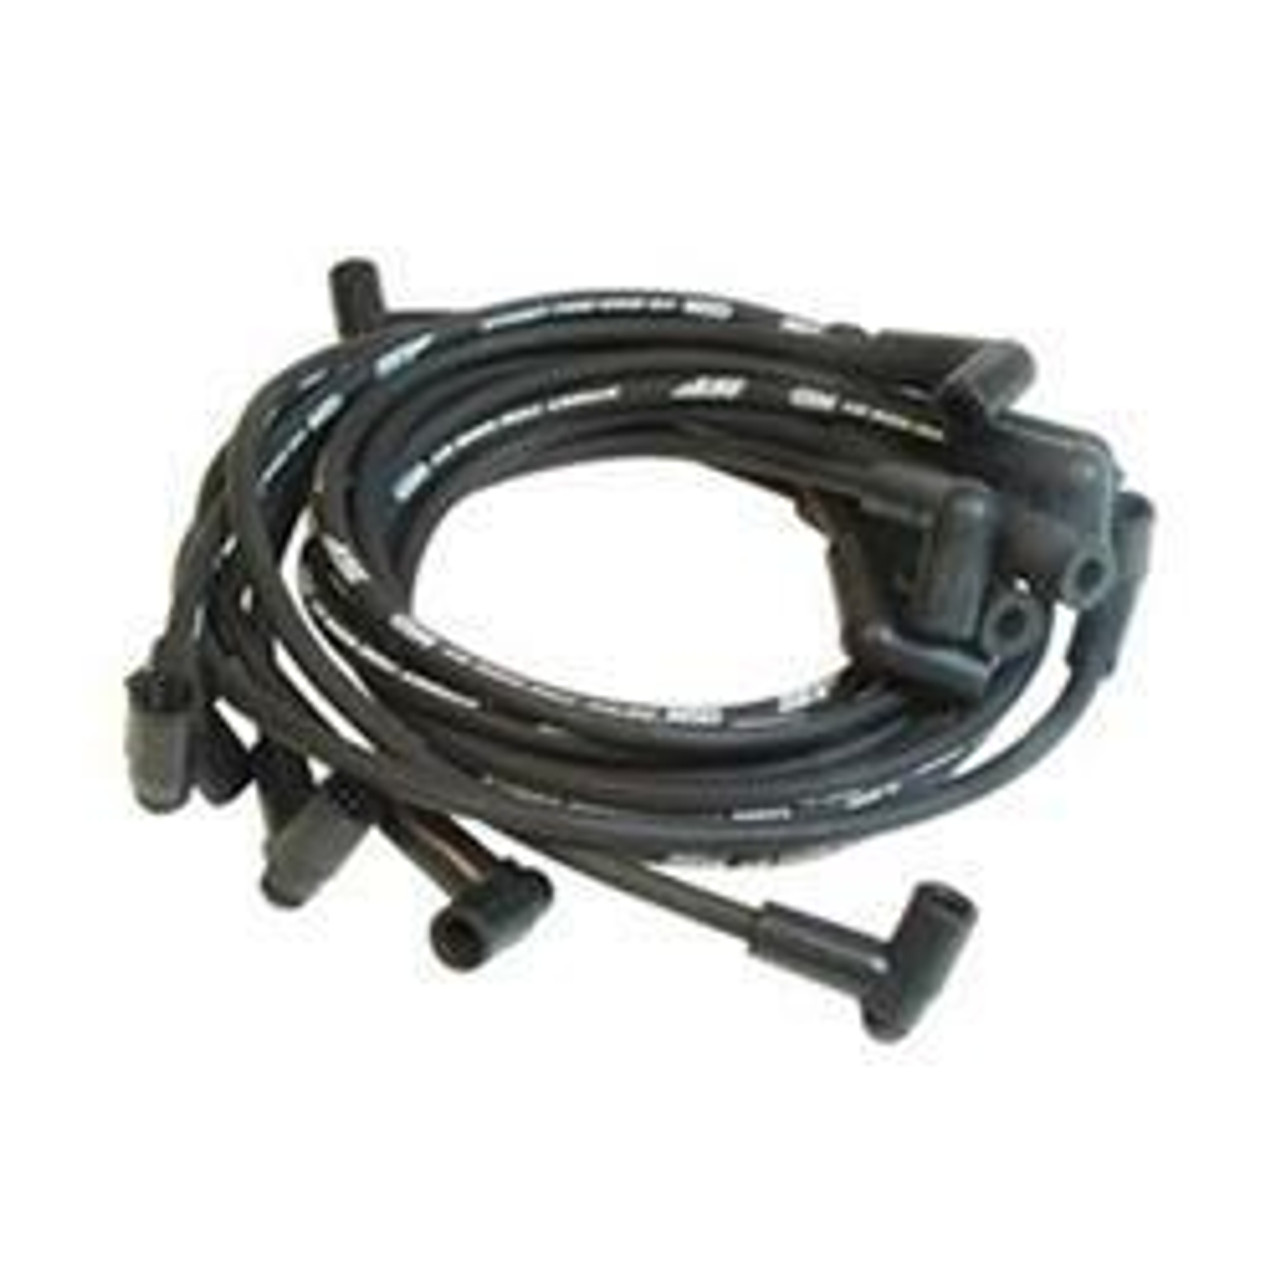 Chevrolet Small Block Spark Plug Wires